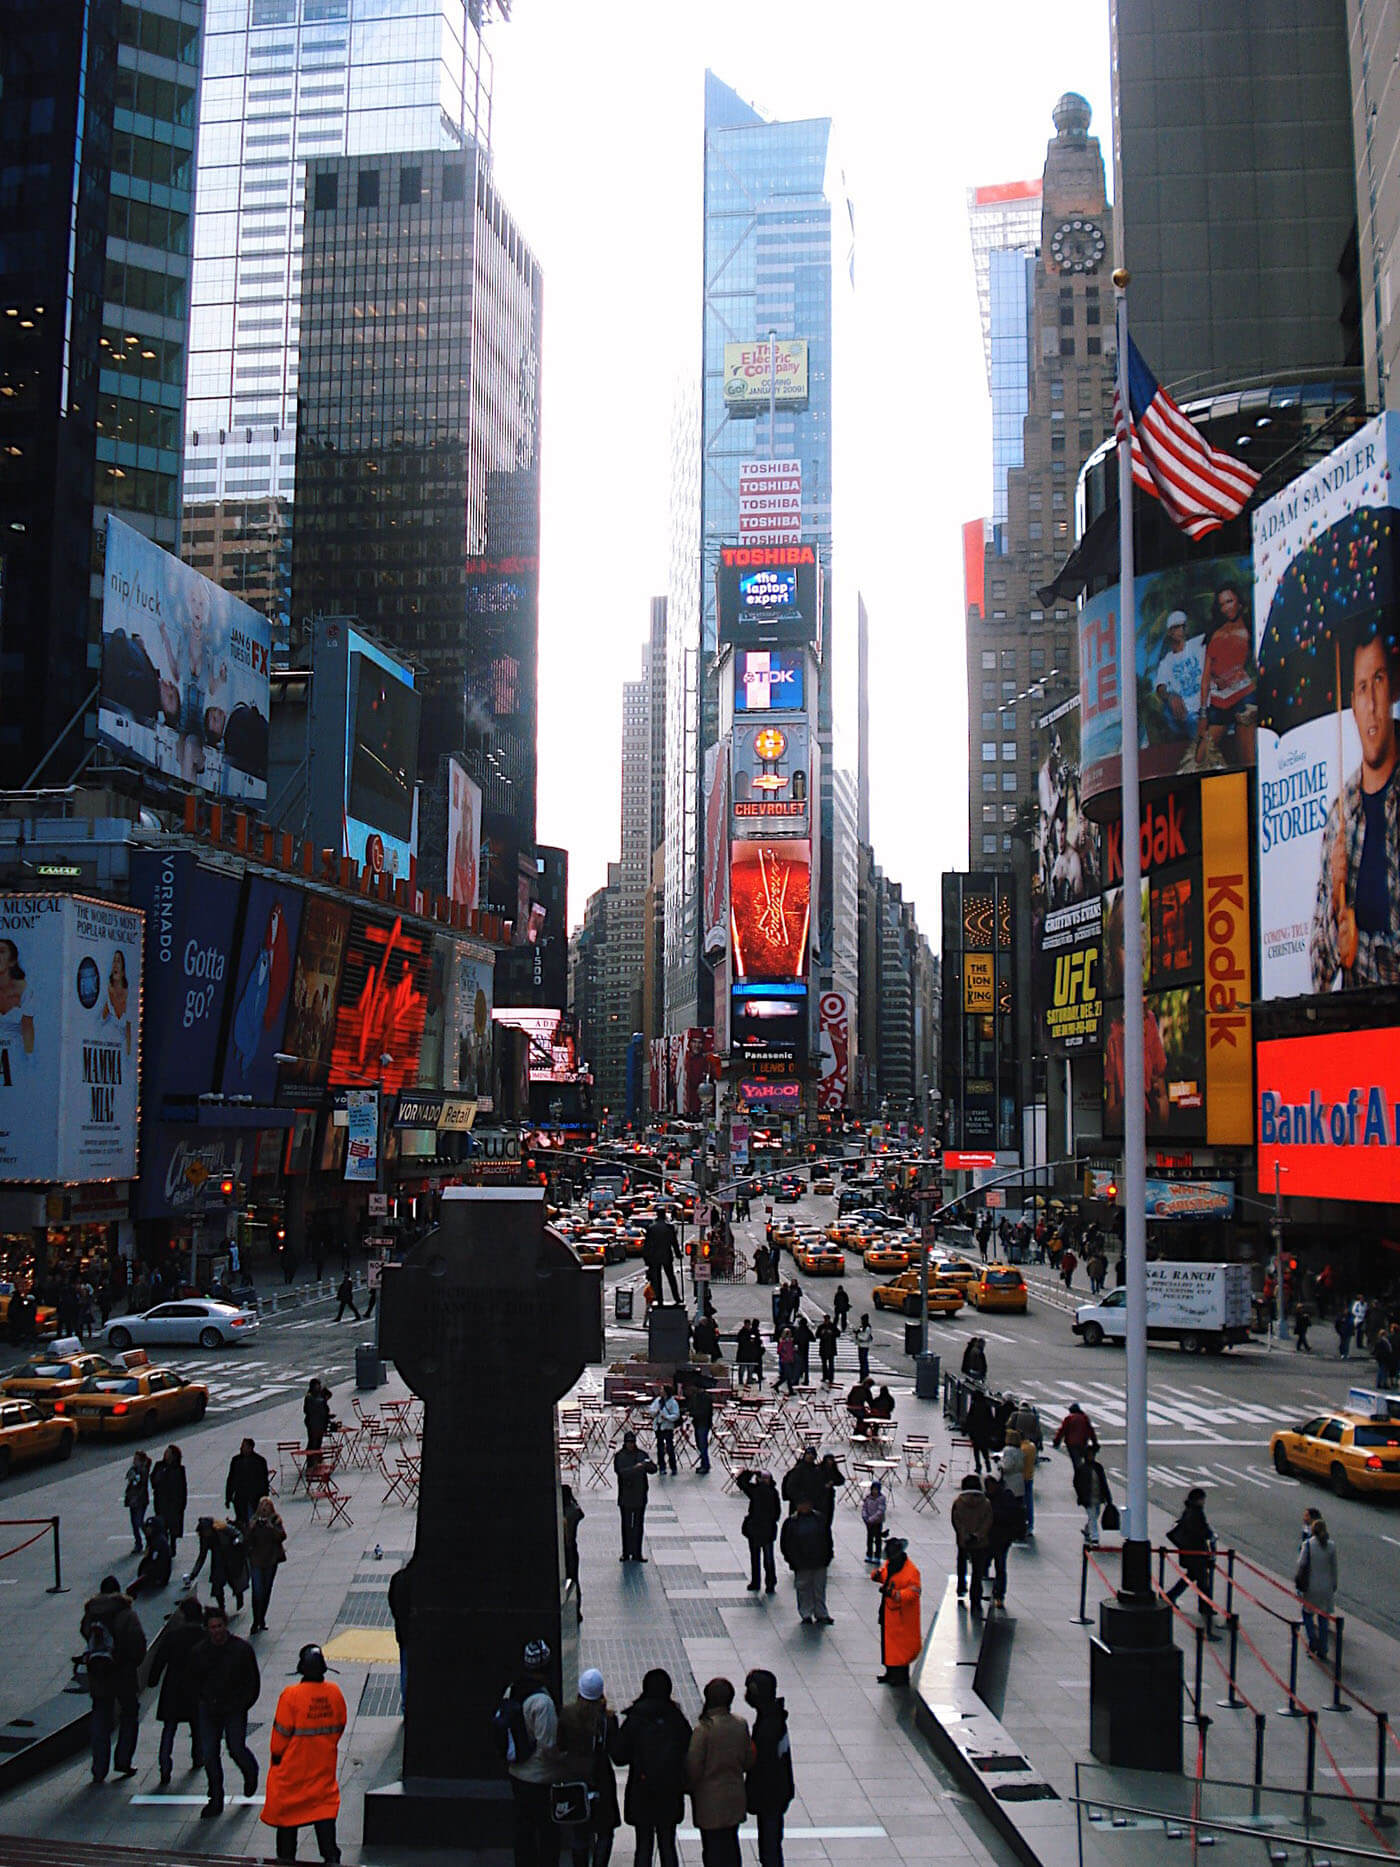 NYC Itinerary - Times Square